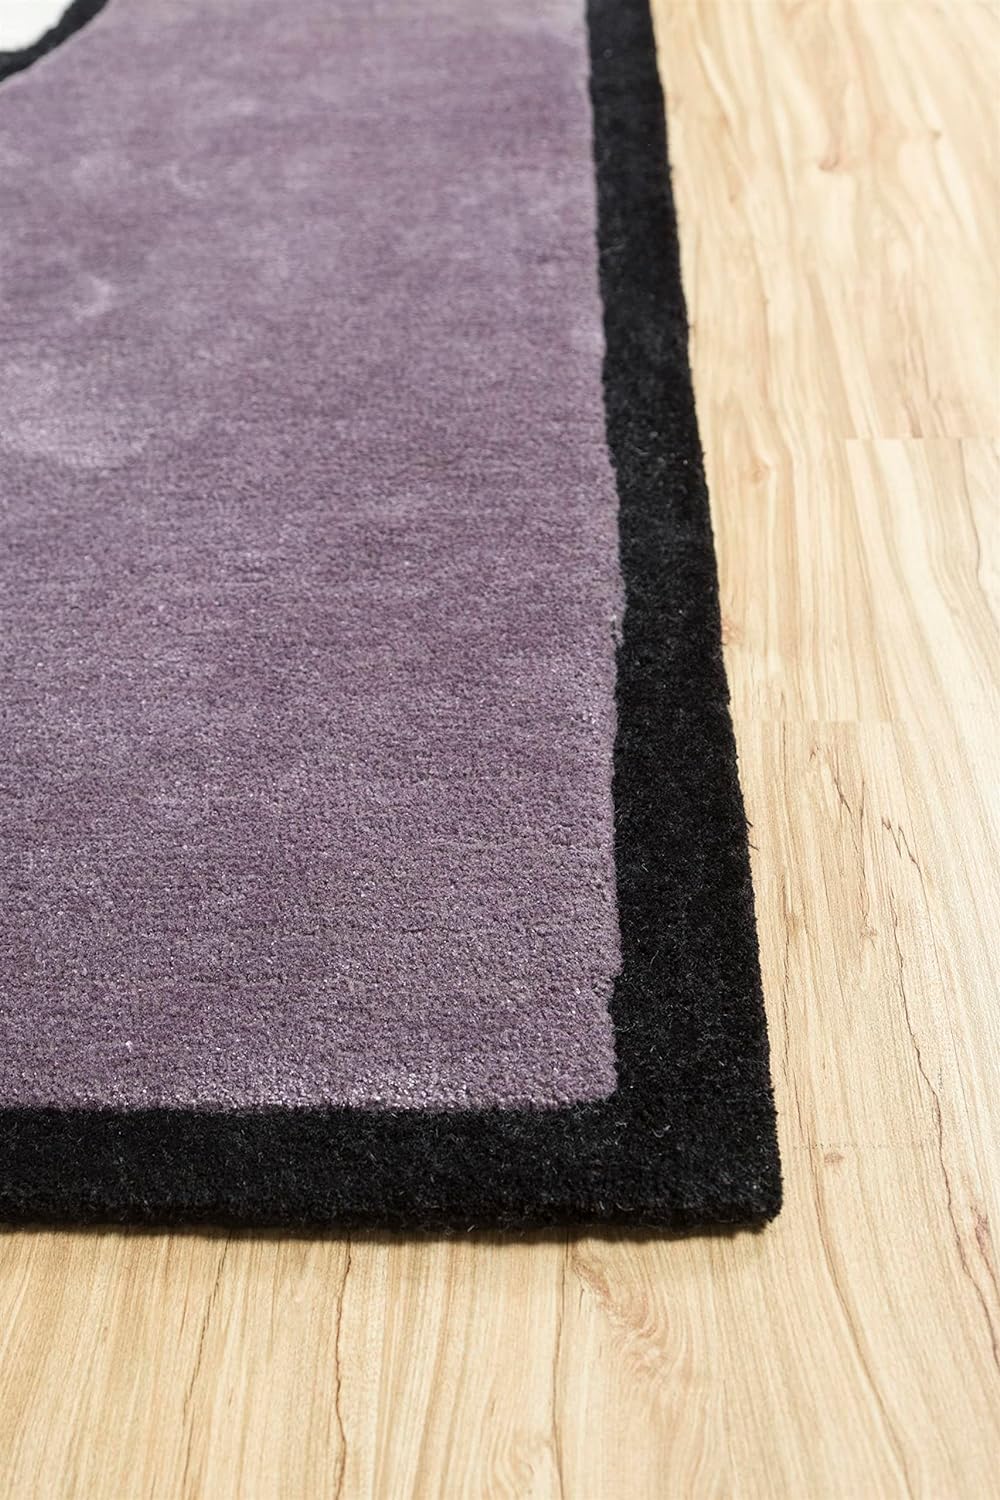 Wild Orchid Wool Blend Rug: Modern Hand-Tufted, 5x8 Feet | Concoction Wool and Viscose Area Carpet (Wild Orchid, 5x8 Feet)